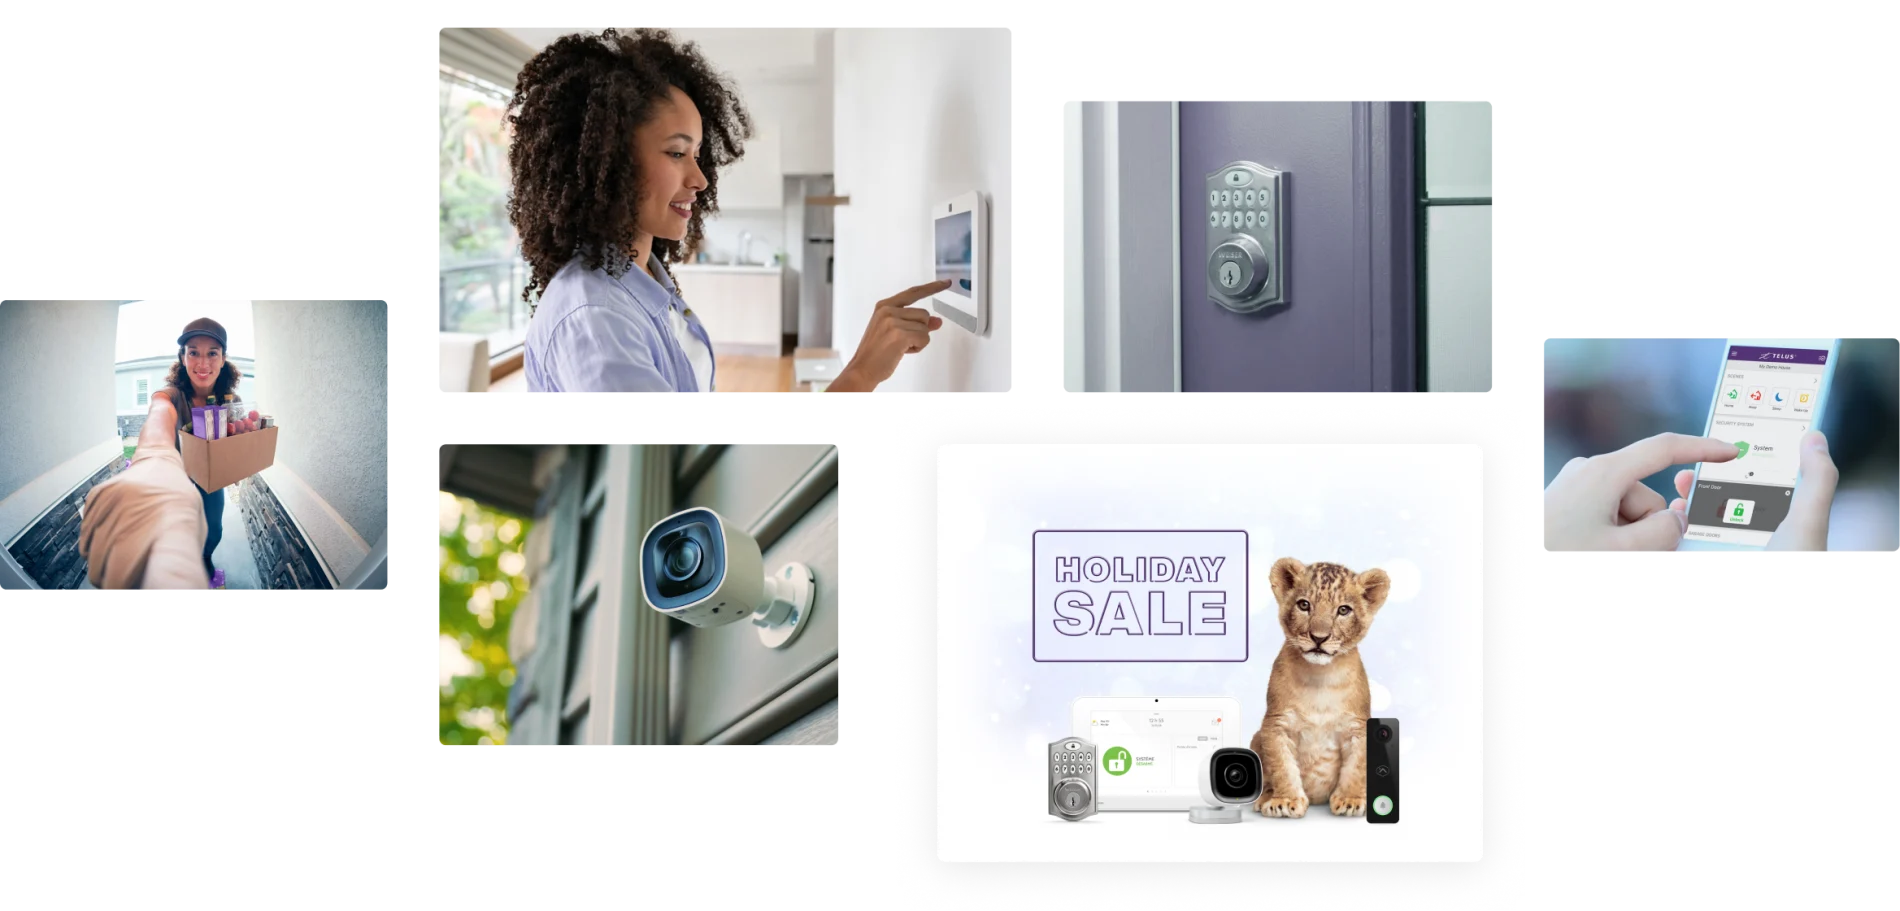 SmartHome Security offers you peace of mind for your home and family.